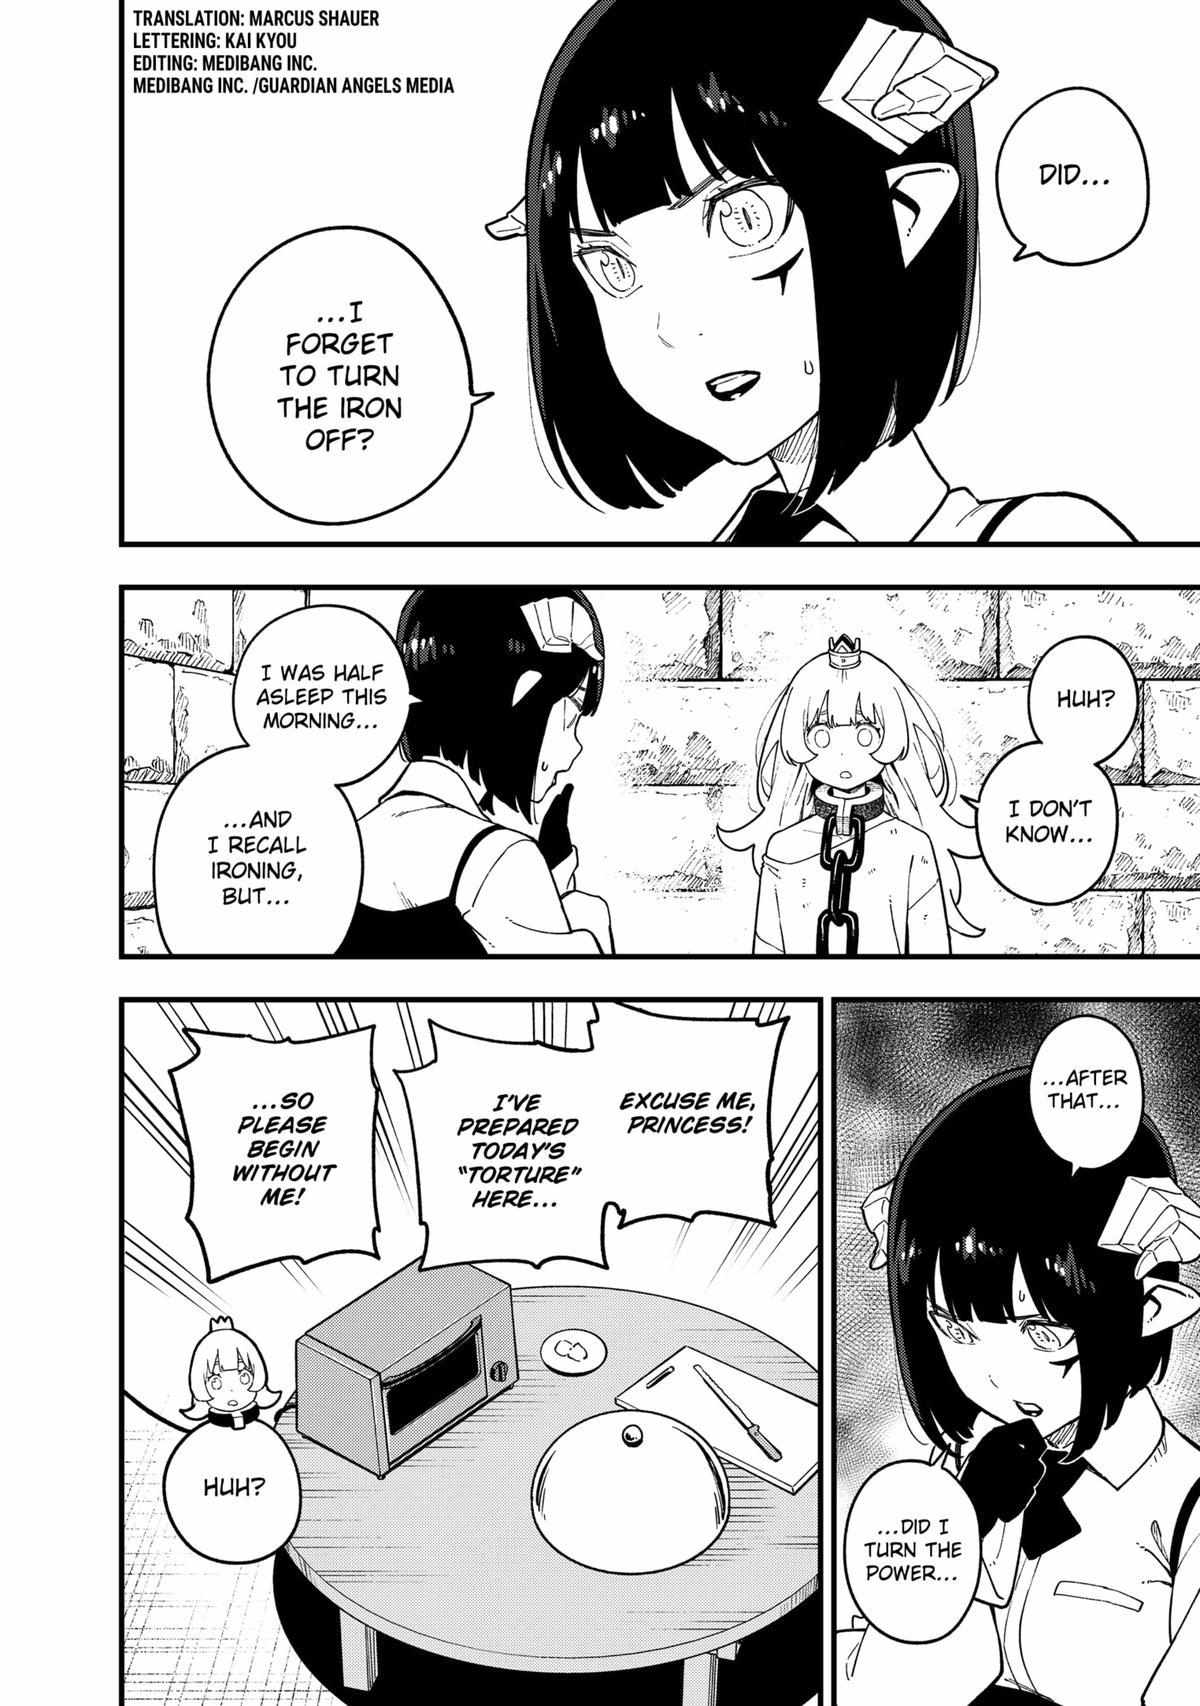 It's Time for "Interrogation", Princess! - chapter 200 - #3